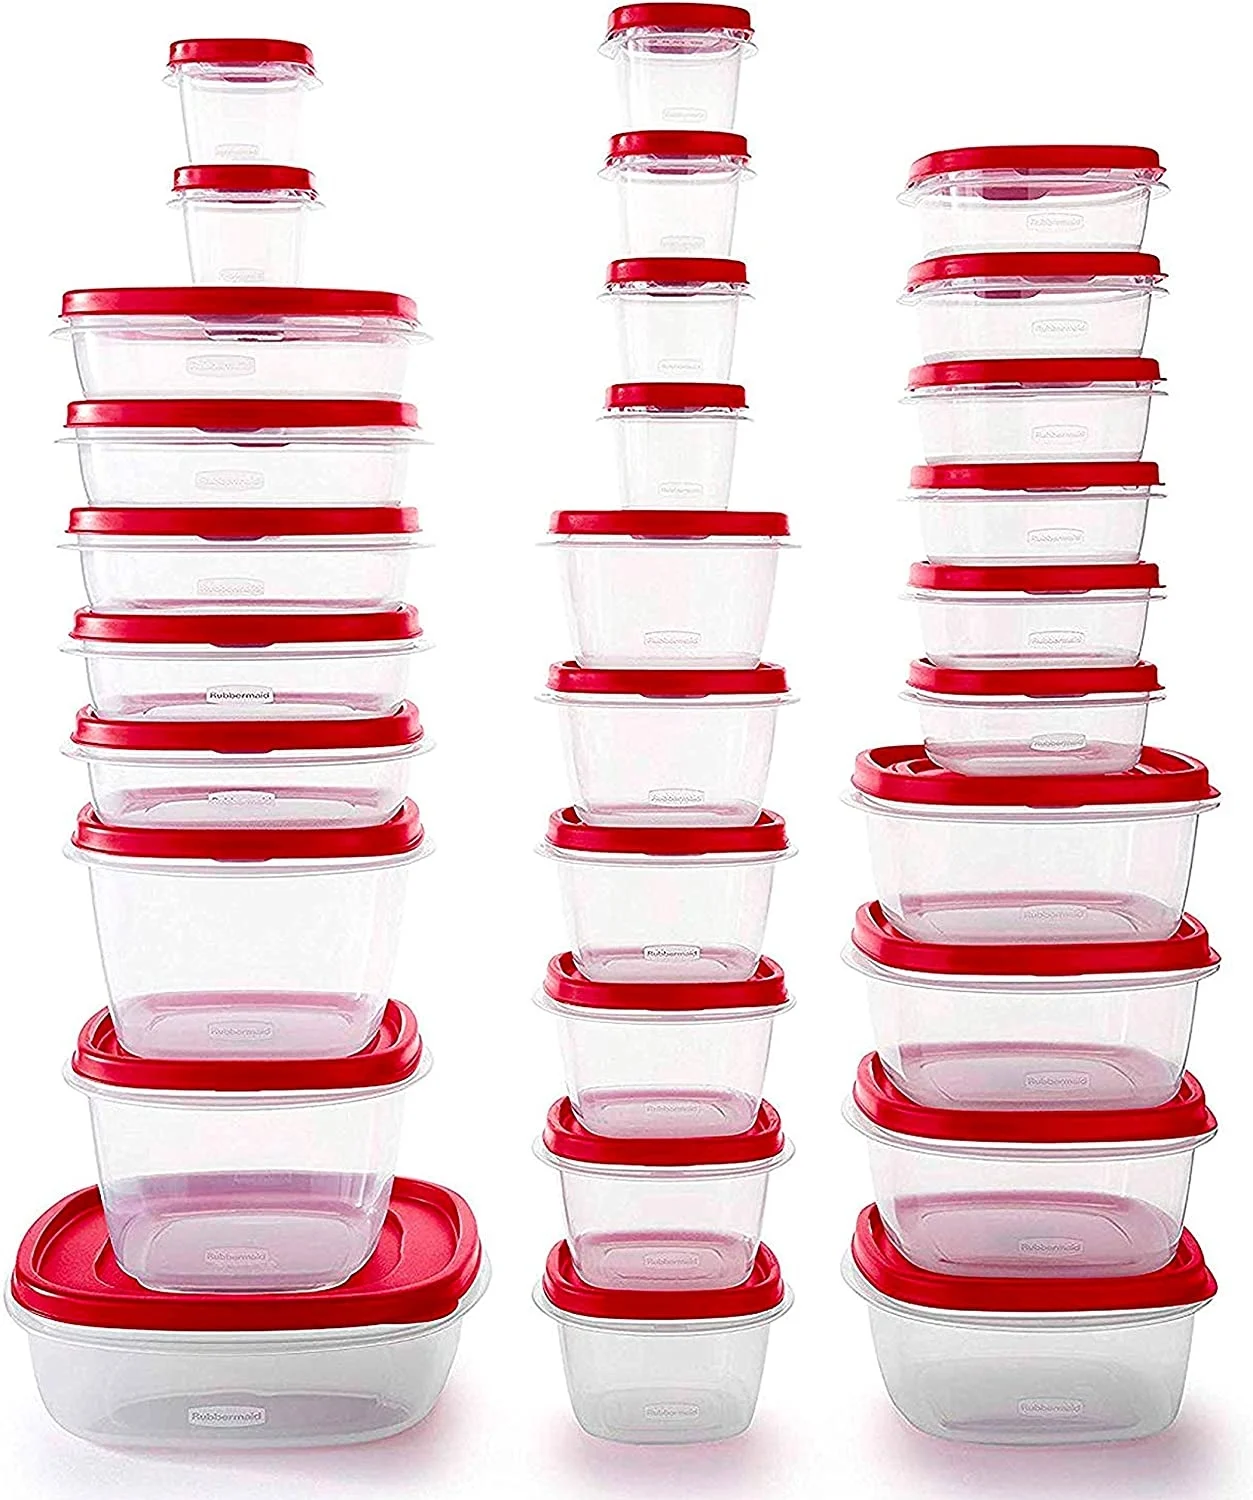 Rubbermaid Food Storage Container on Amazon